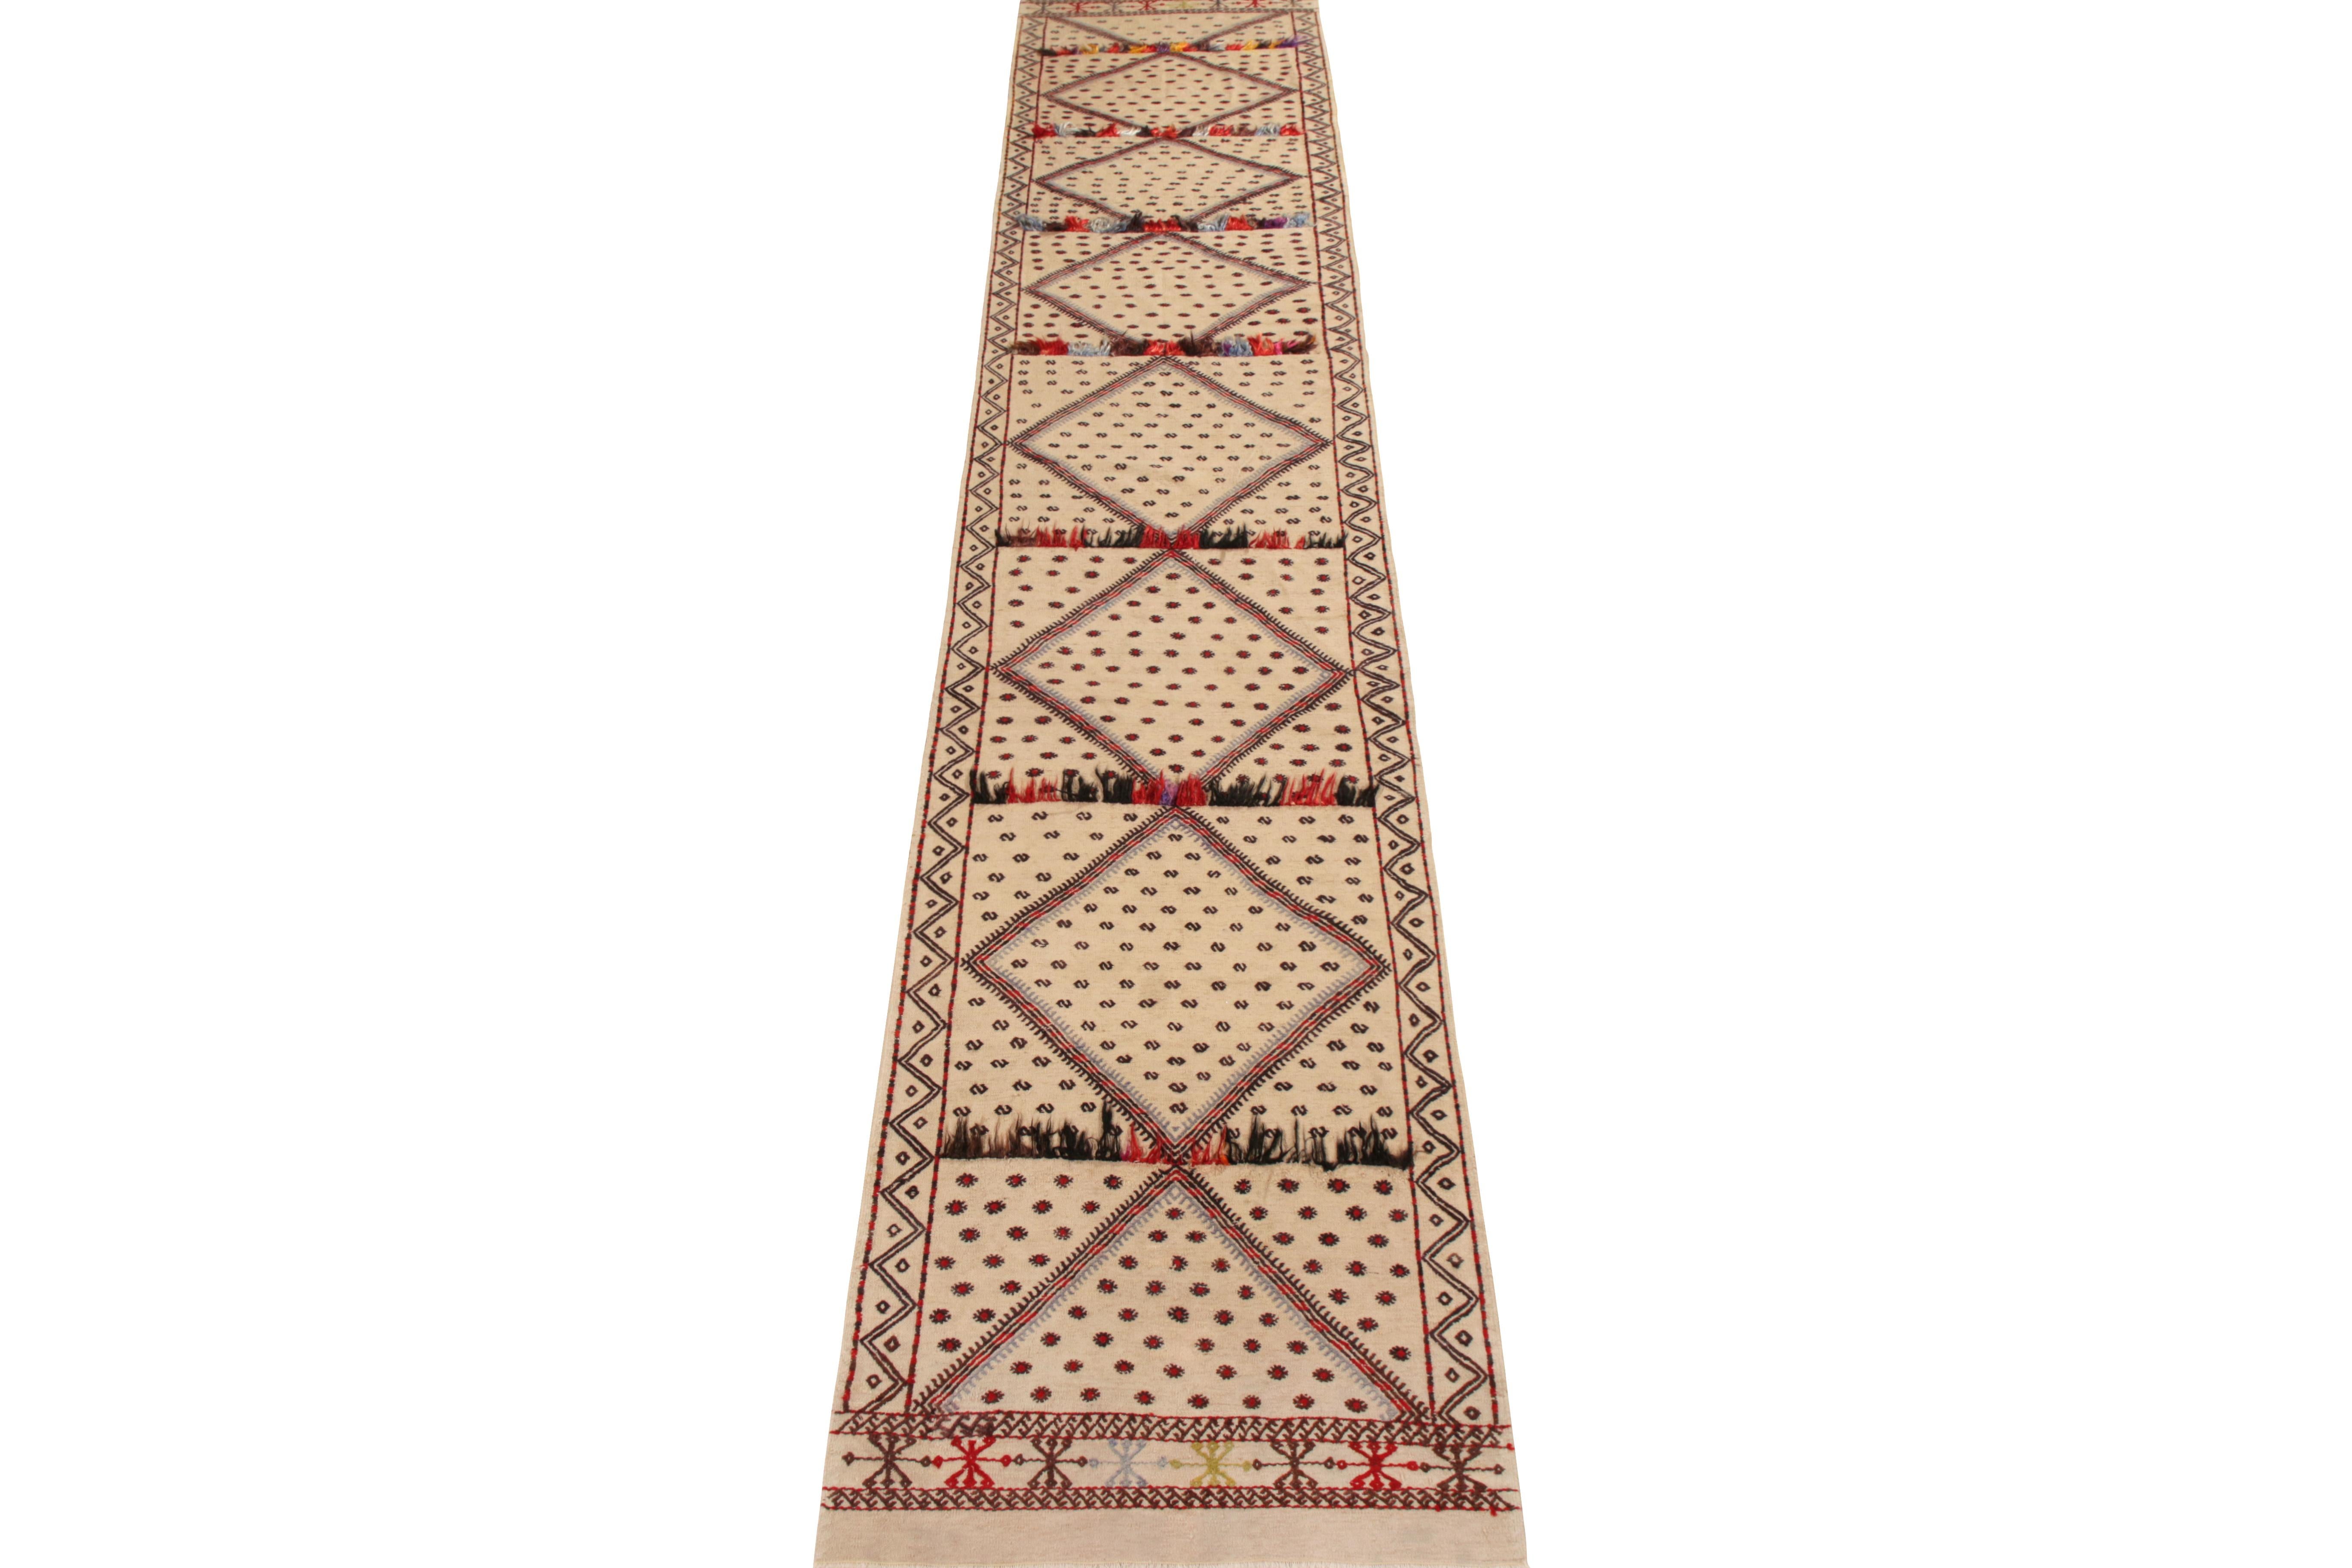 An elegant 3 x 16 Sivas Kilim runner from the vintage selections in Rug & Kilim’s renowned Kilim & Flat Weave Collection. Handwoven in wool originating from Turkey circa 1950–1960, the runner enjoys a rare play of flat weaving and pile techniques.